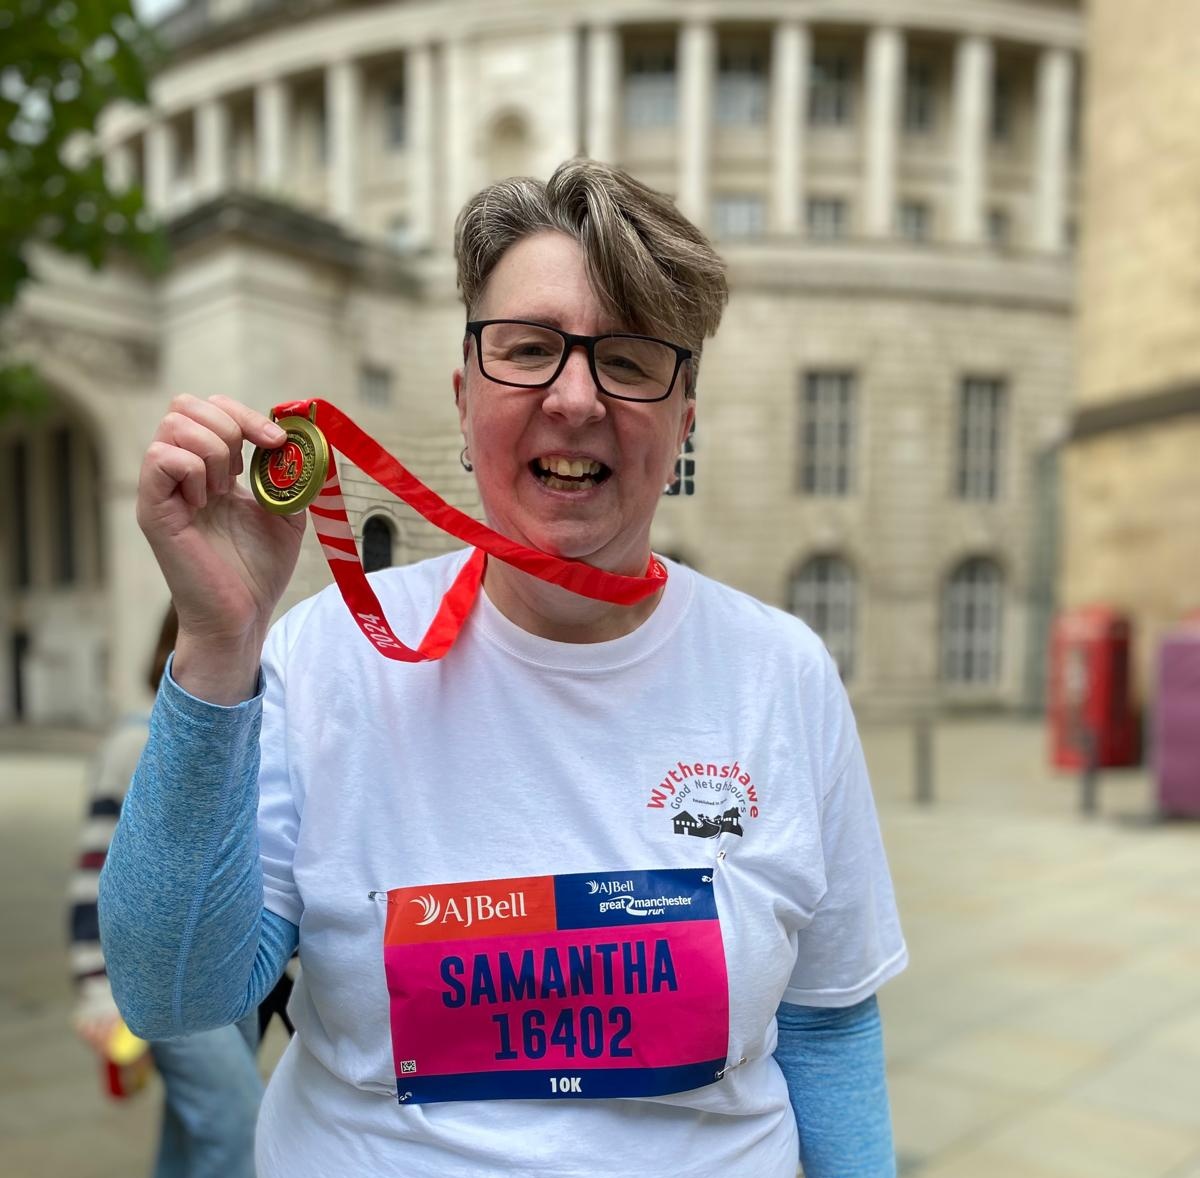 Sam has finished her 10k #GreatManchesterRun challenge and has received her medal! We are properly chuffed for her. Fantastic effort - and she's getting closer to her fundraising 🎯 - meaning we can help subsidise a day trip to the seaside for our Members. bit.ly/4bxRbFQ